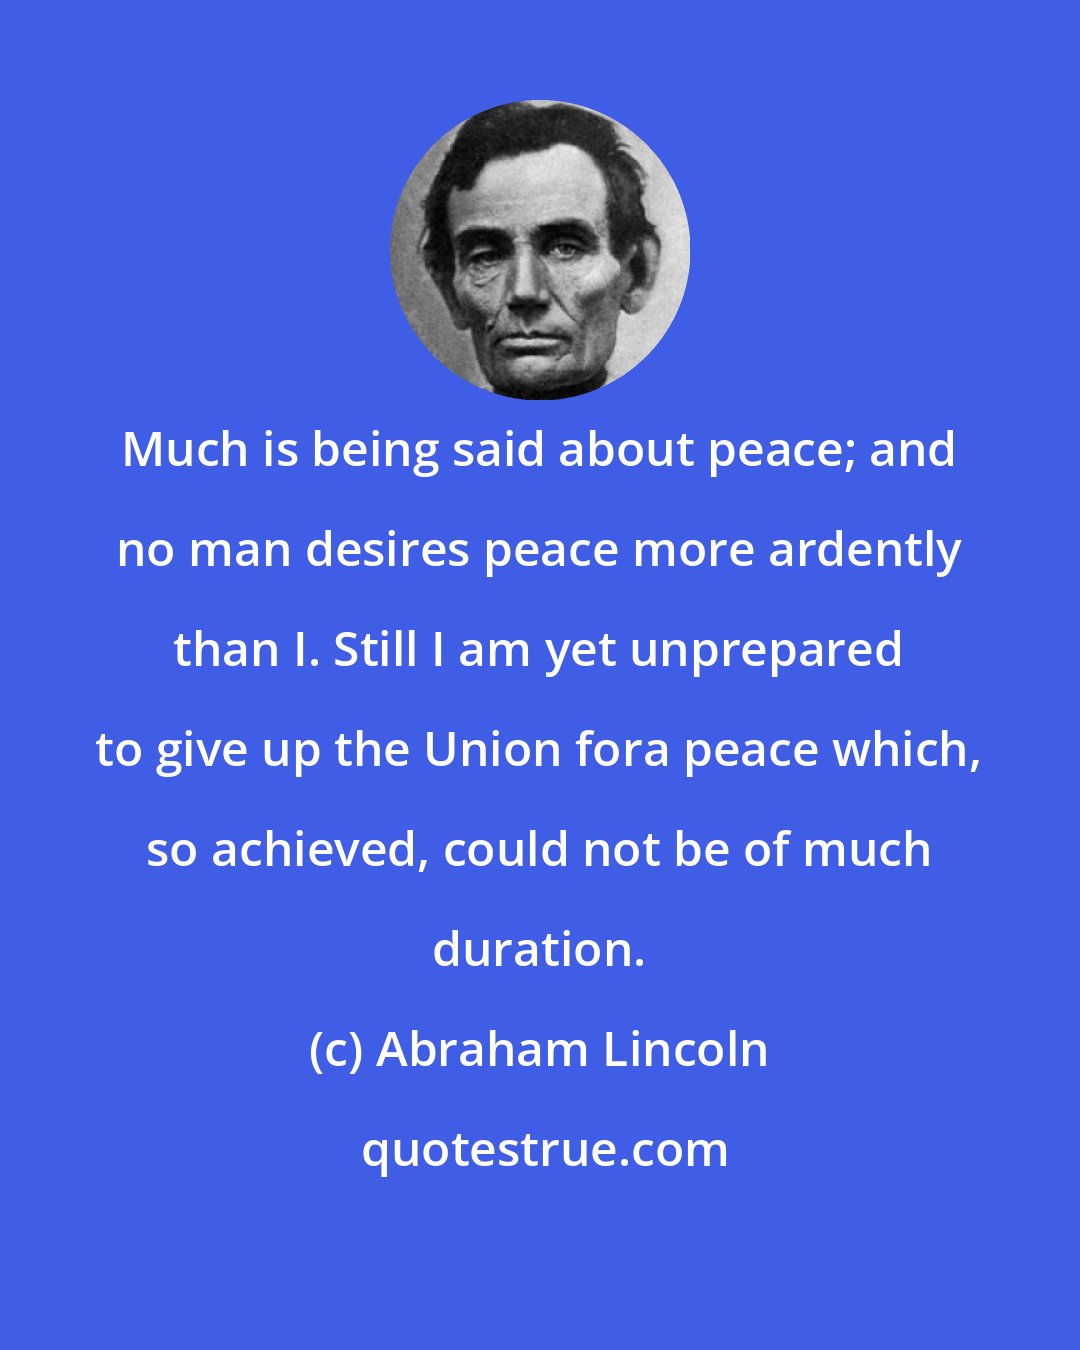 Abraham Lincoln: Much is being said about peace; and no man desires peace more ardently than I. Still I am yet unprepared to give up the Union fora peace which, so achieved, could not be of much duration.